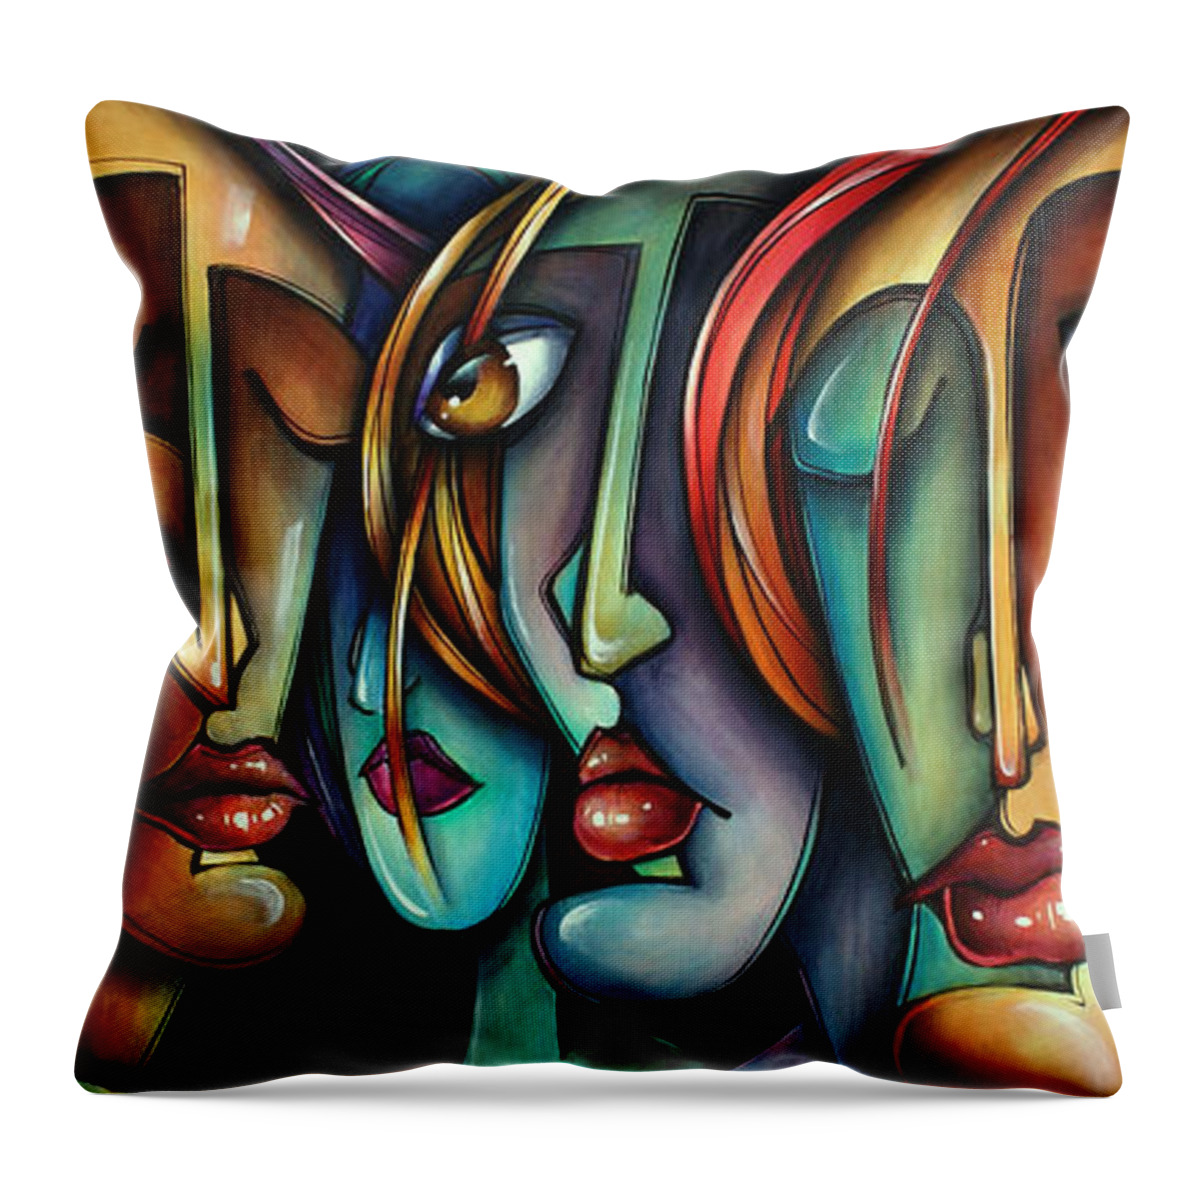 Portrait Throw Pillow featuring the painting 'Face Us' by Michael Lang